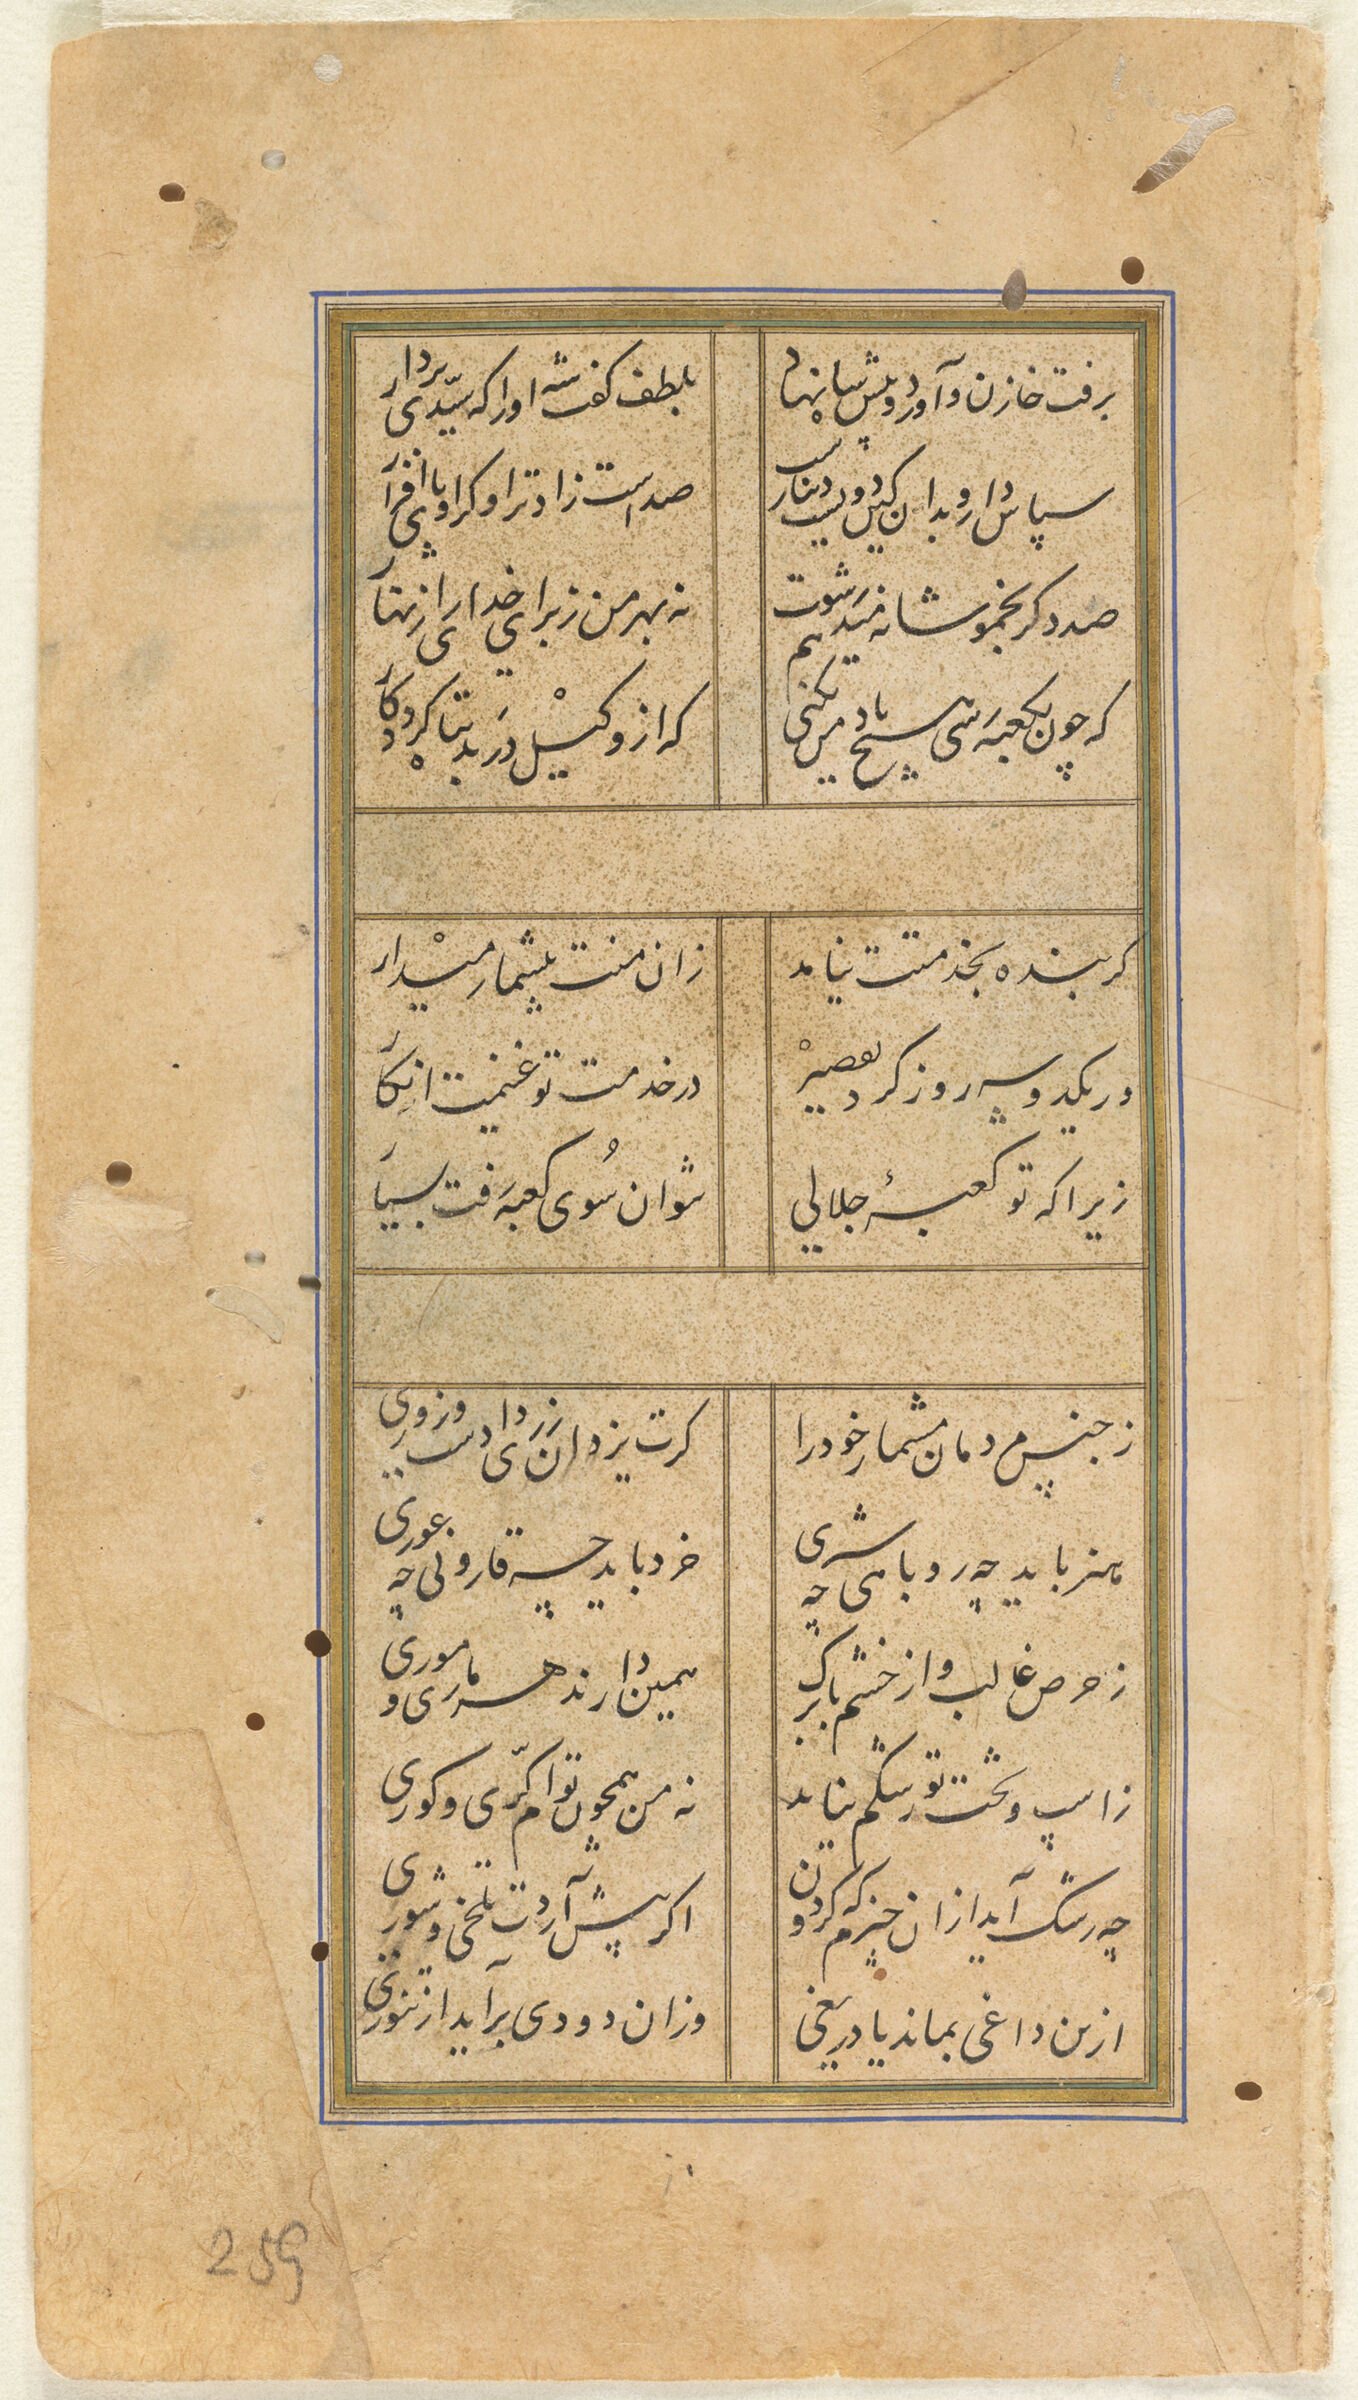 Folio 259 (Text, Recto And Verso), From A Manuscript Of The Divan Of Anvari